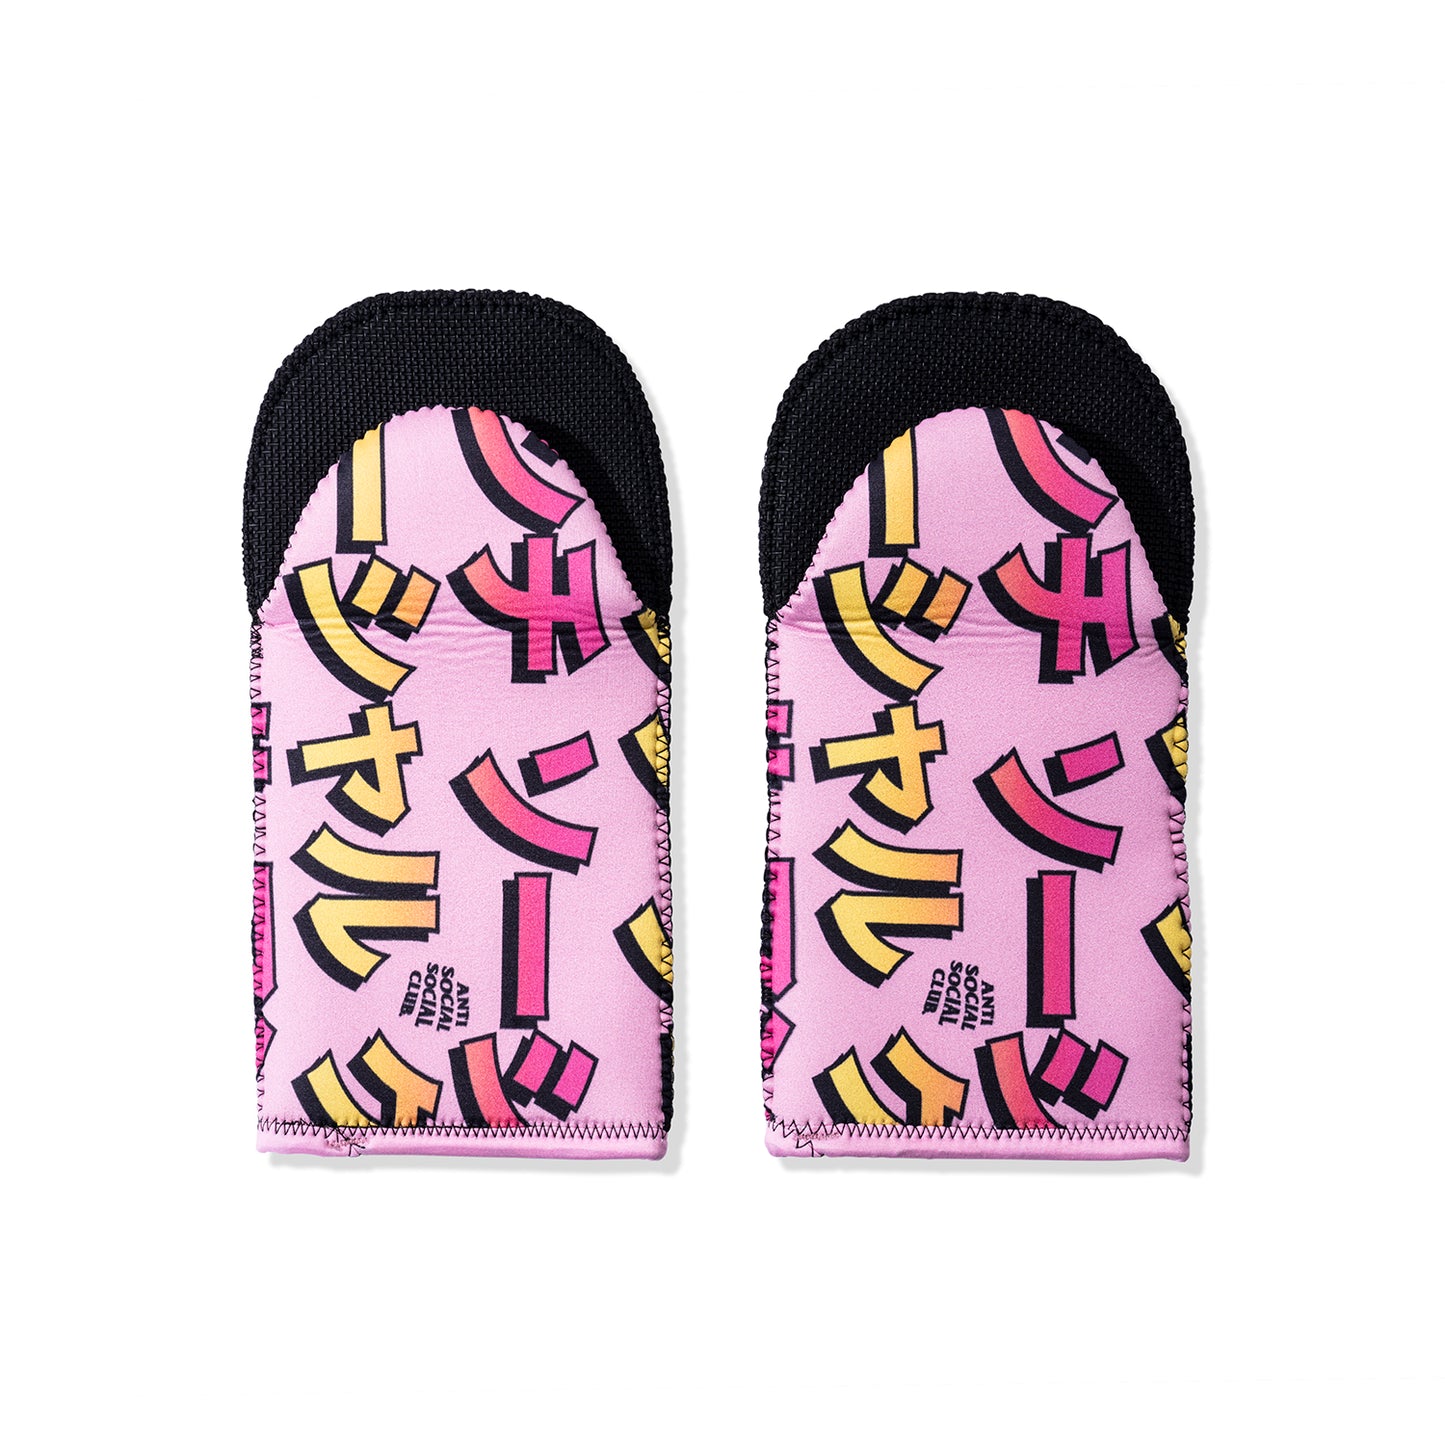 Custom printed oven mitts - black and pink